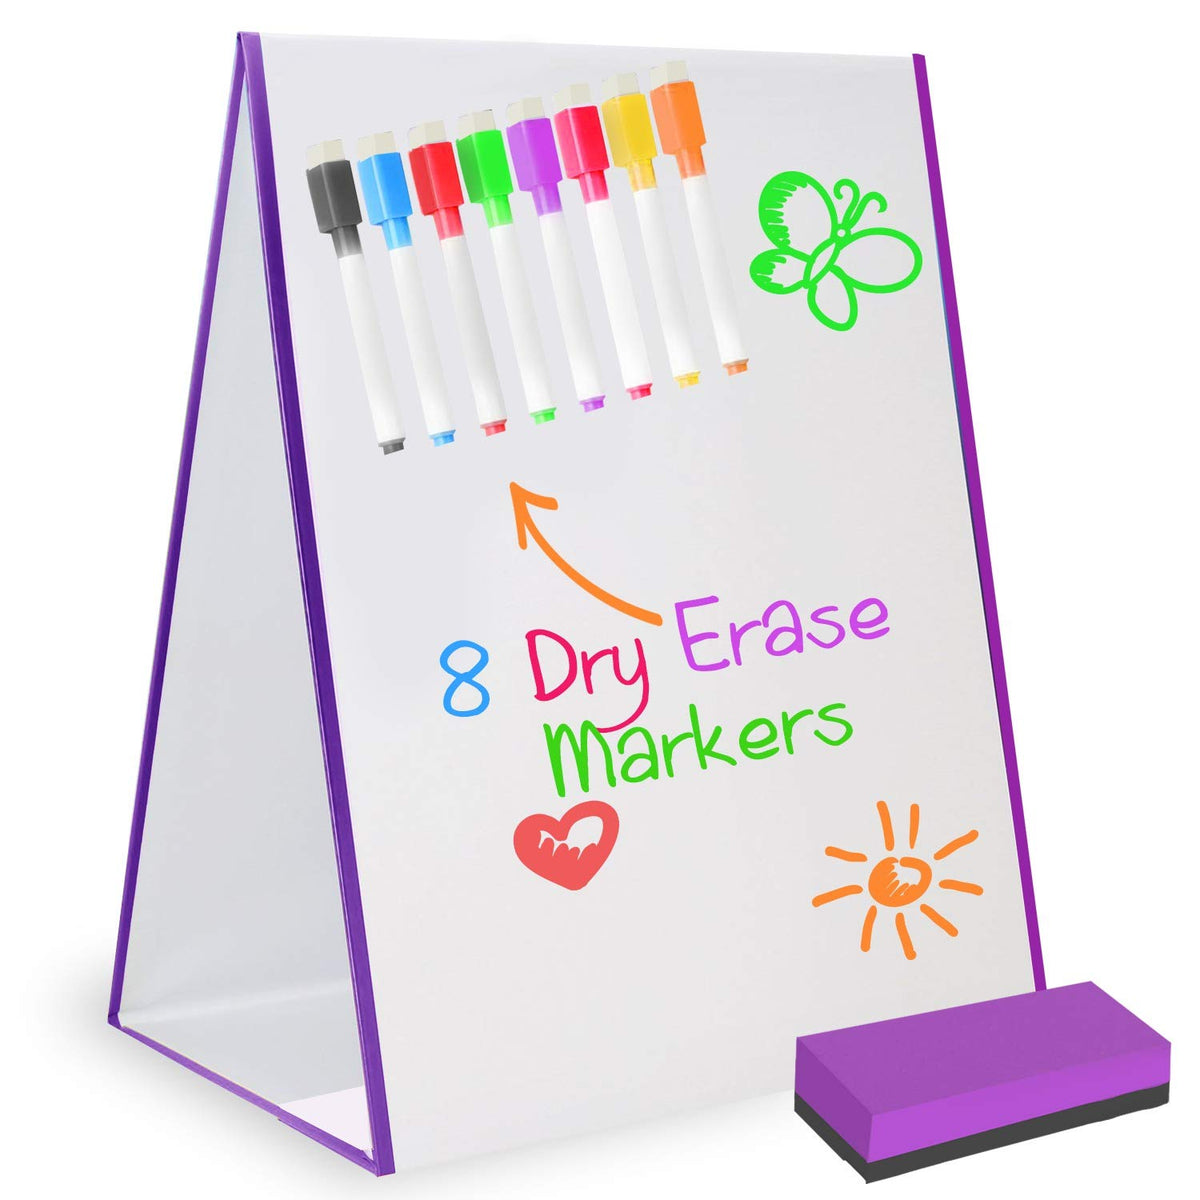 DasKid Tabletop Magnetic Easel & Whiteboard (2 Sides) Includes: 4 Dry Erase Markers. Drawing Art White Board Educational Kids Toy